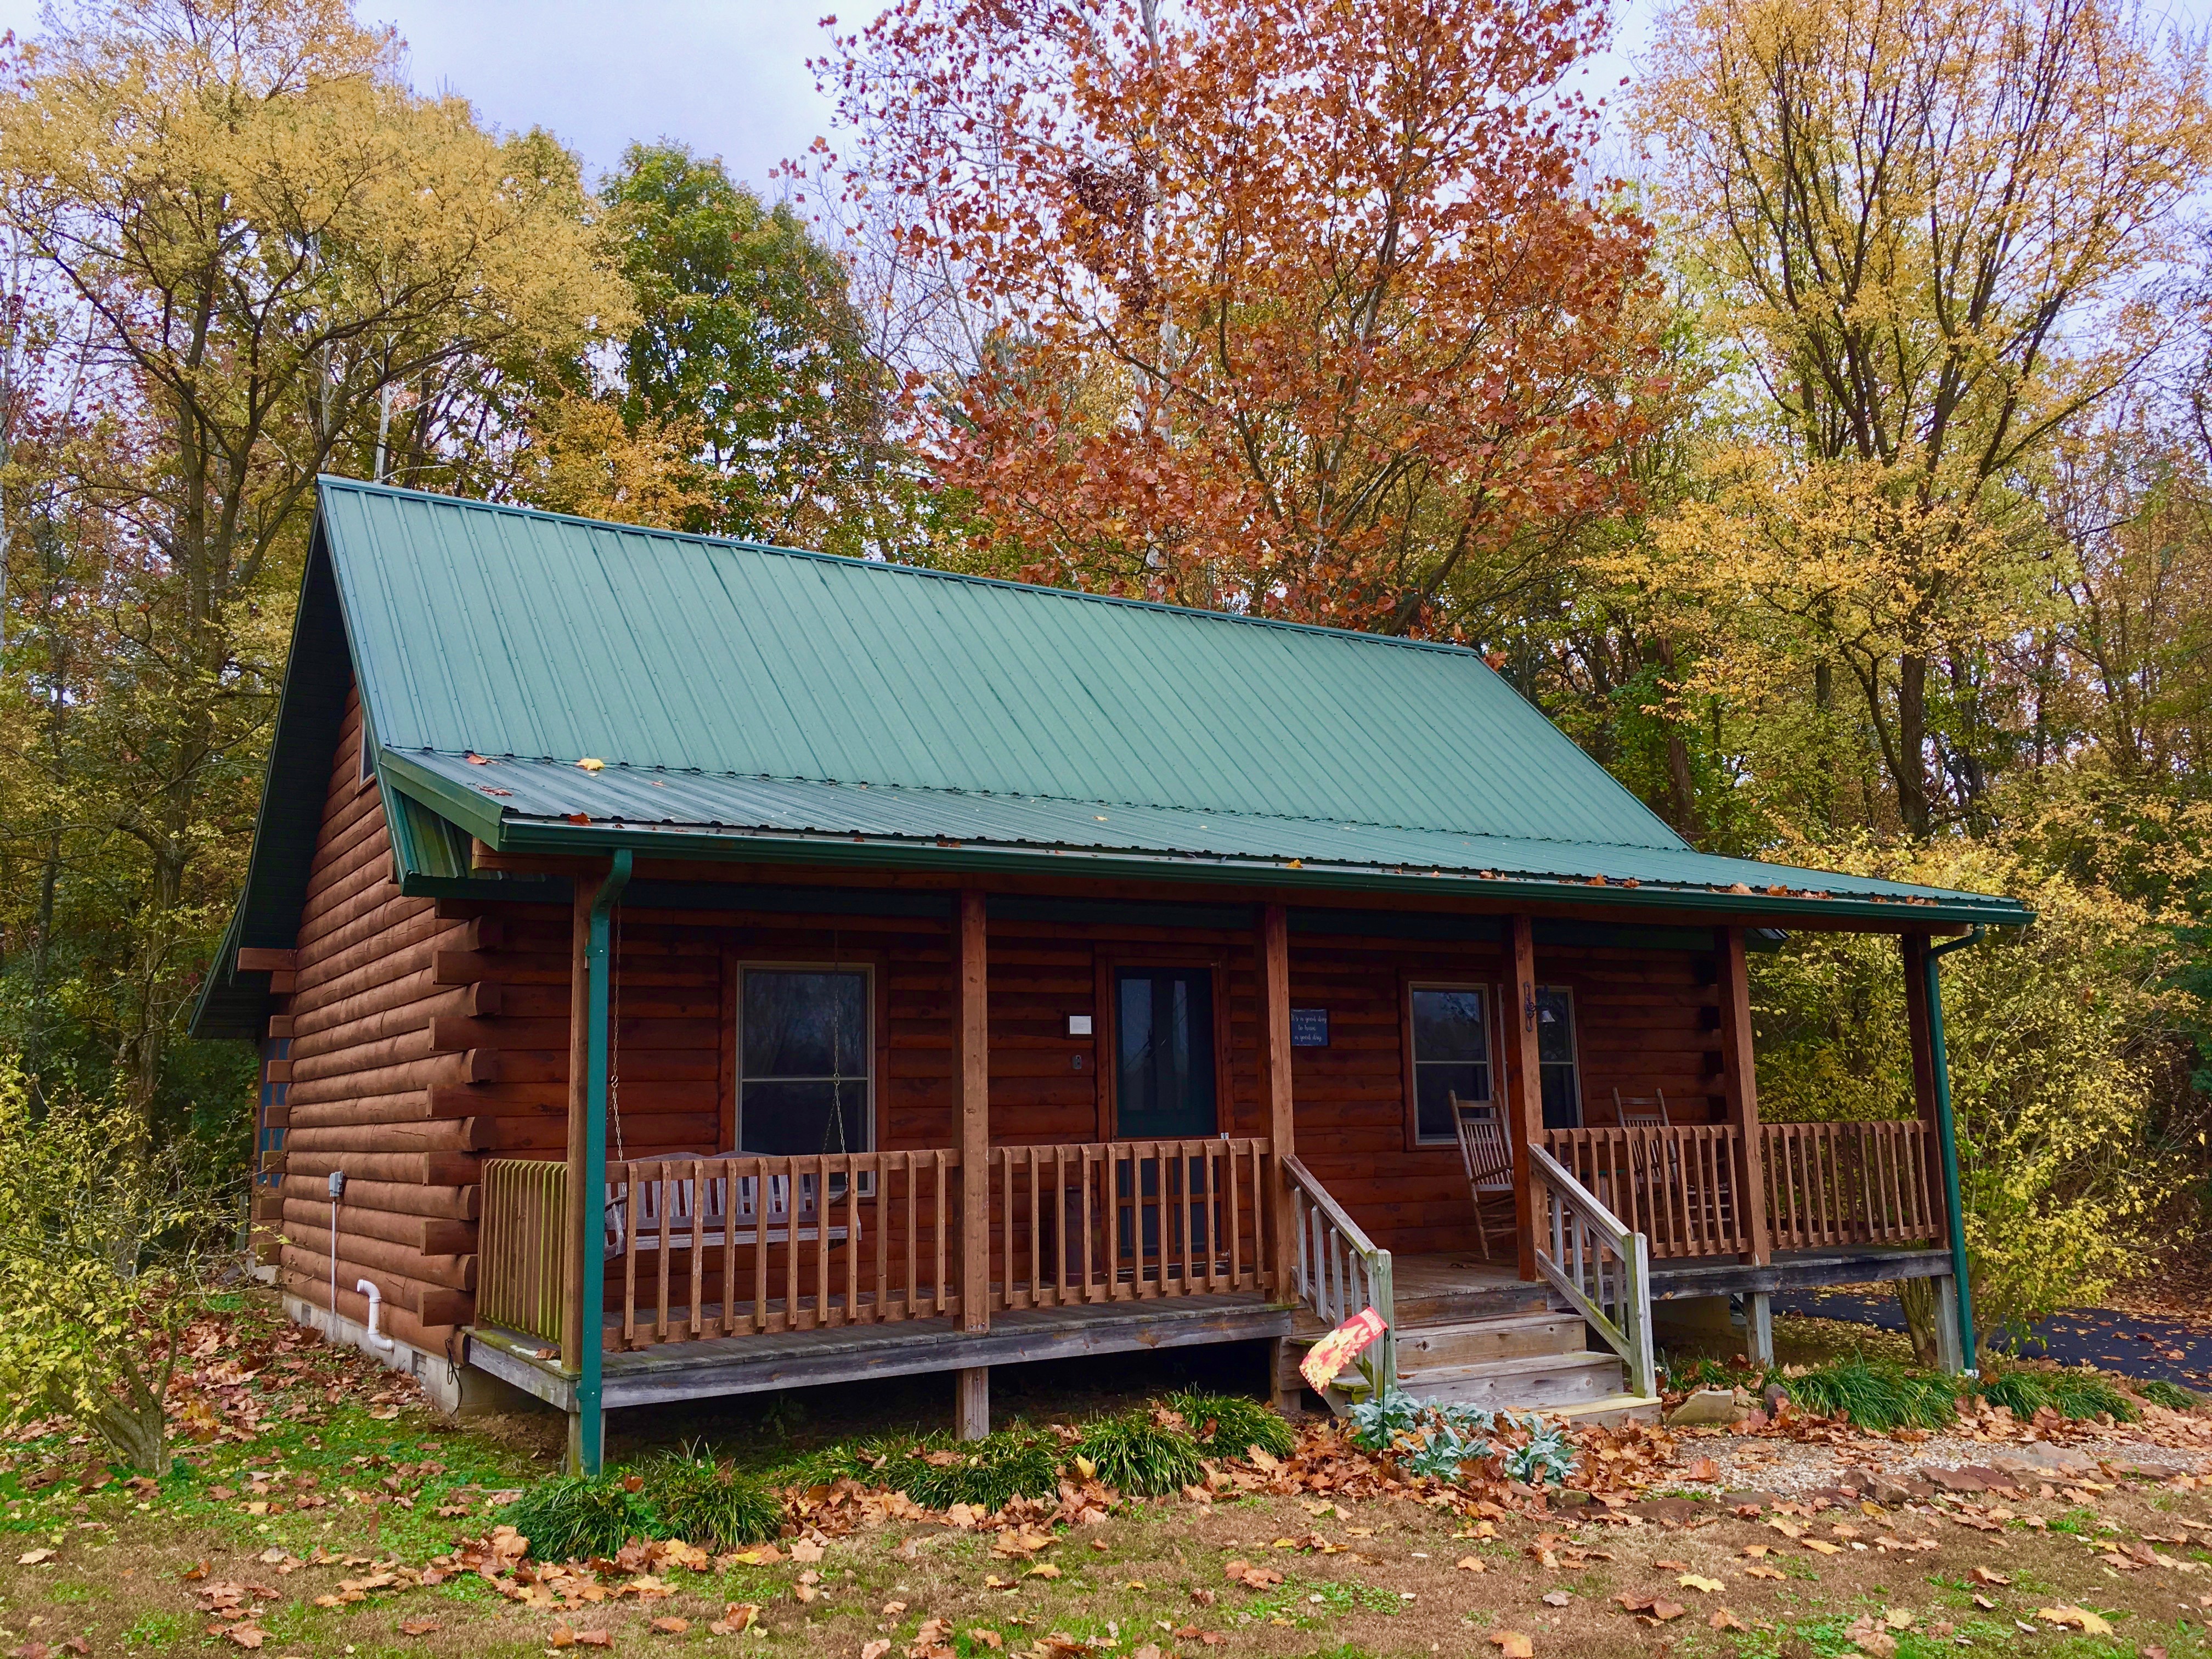 Southern Illinois Cabin Association Cabin Rental Information In Southern Illinois